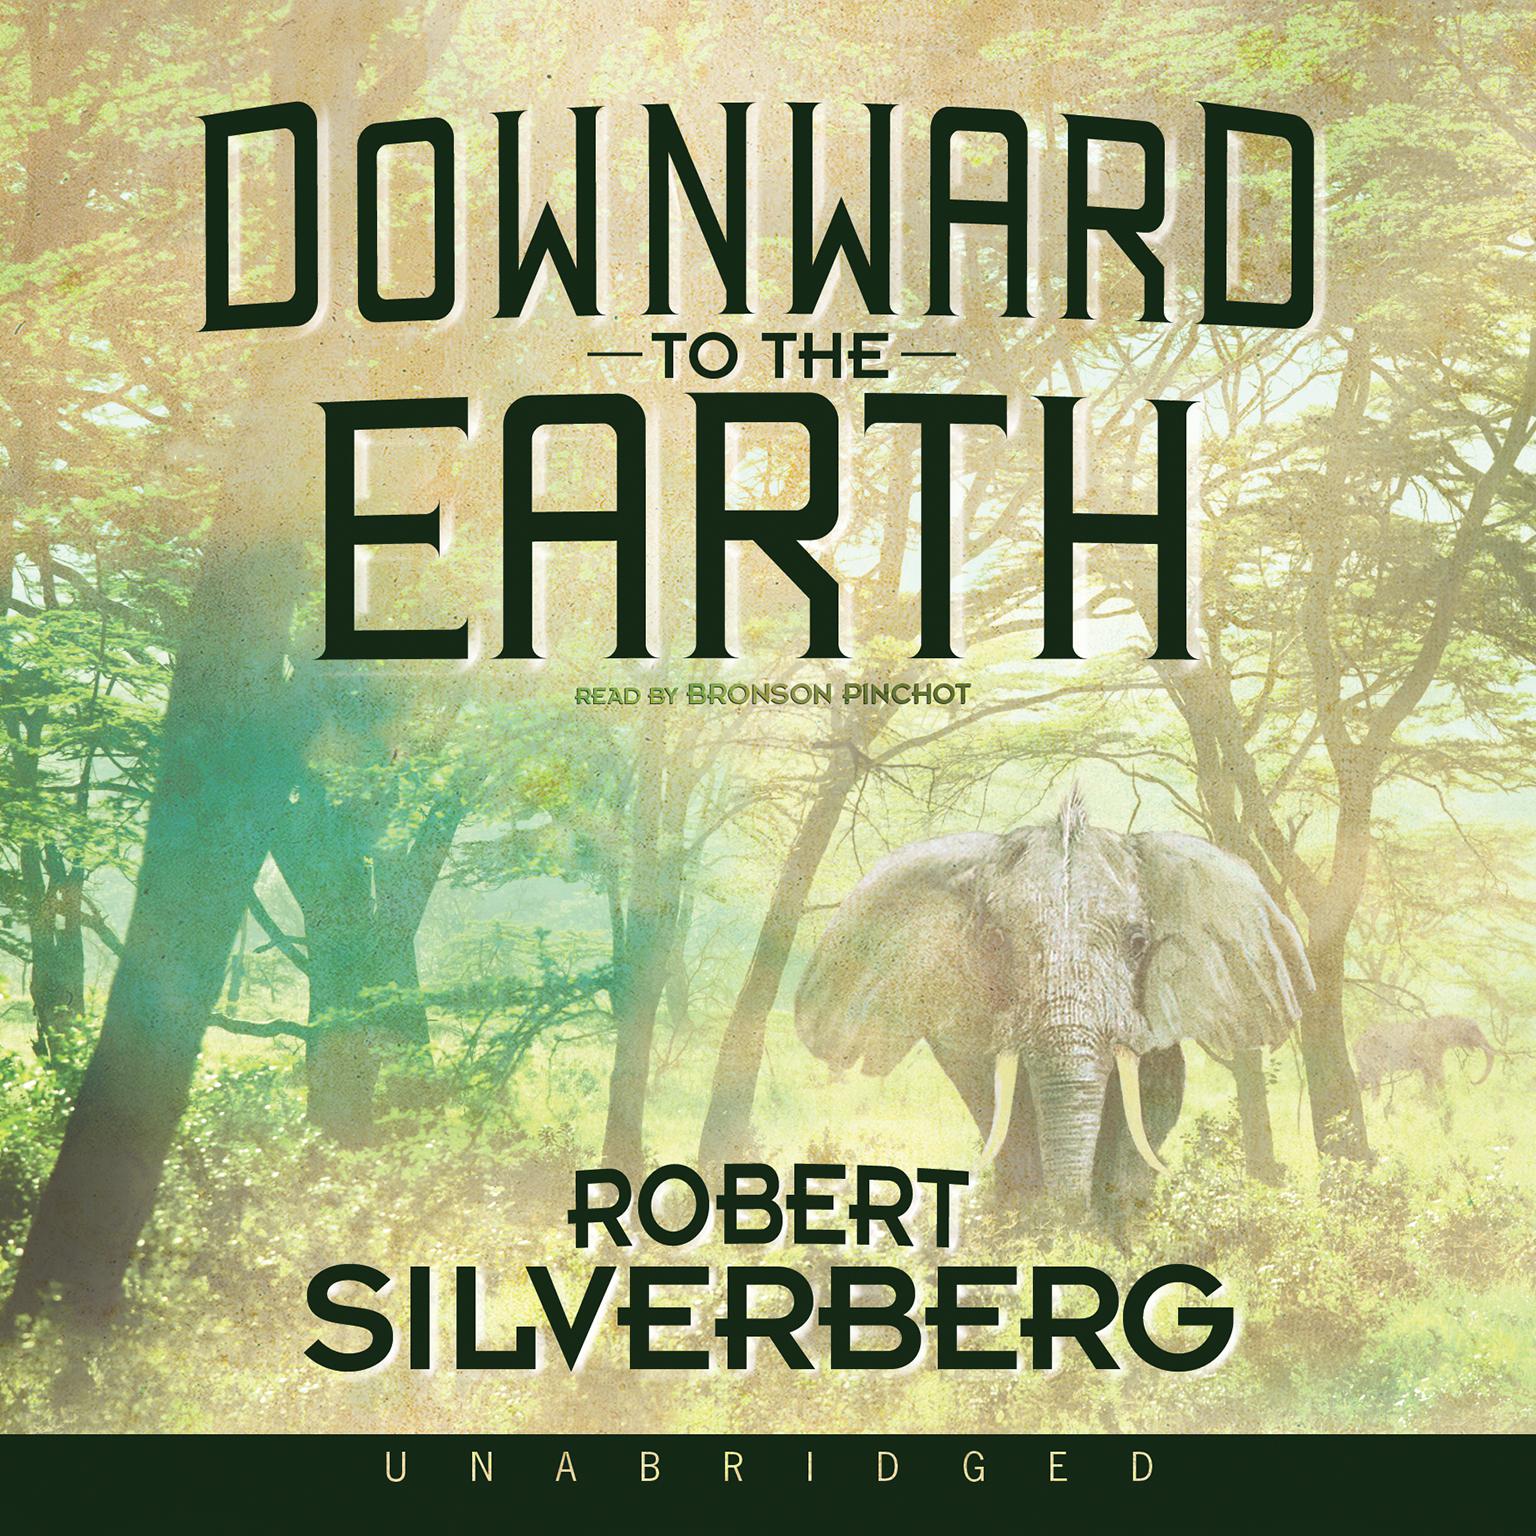 Downward to the Earth Audiobook, by Robert Silverberg